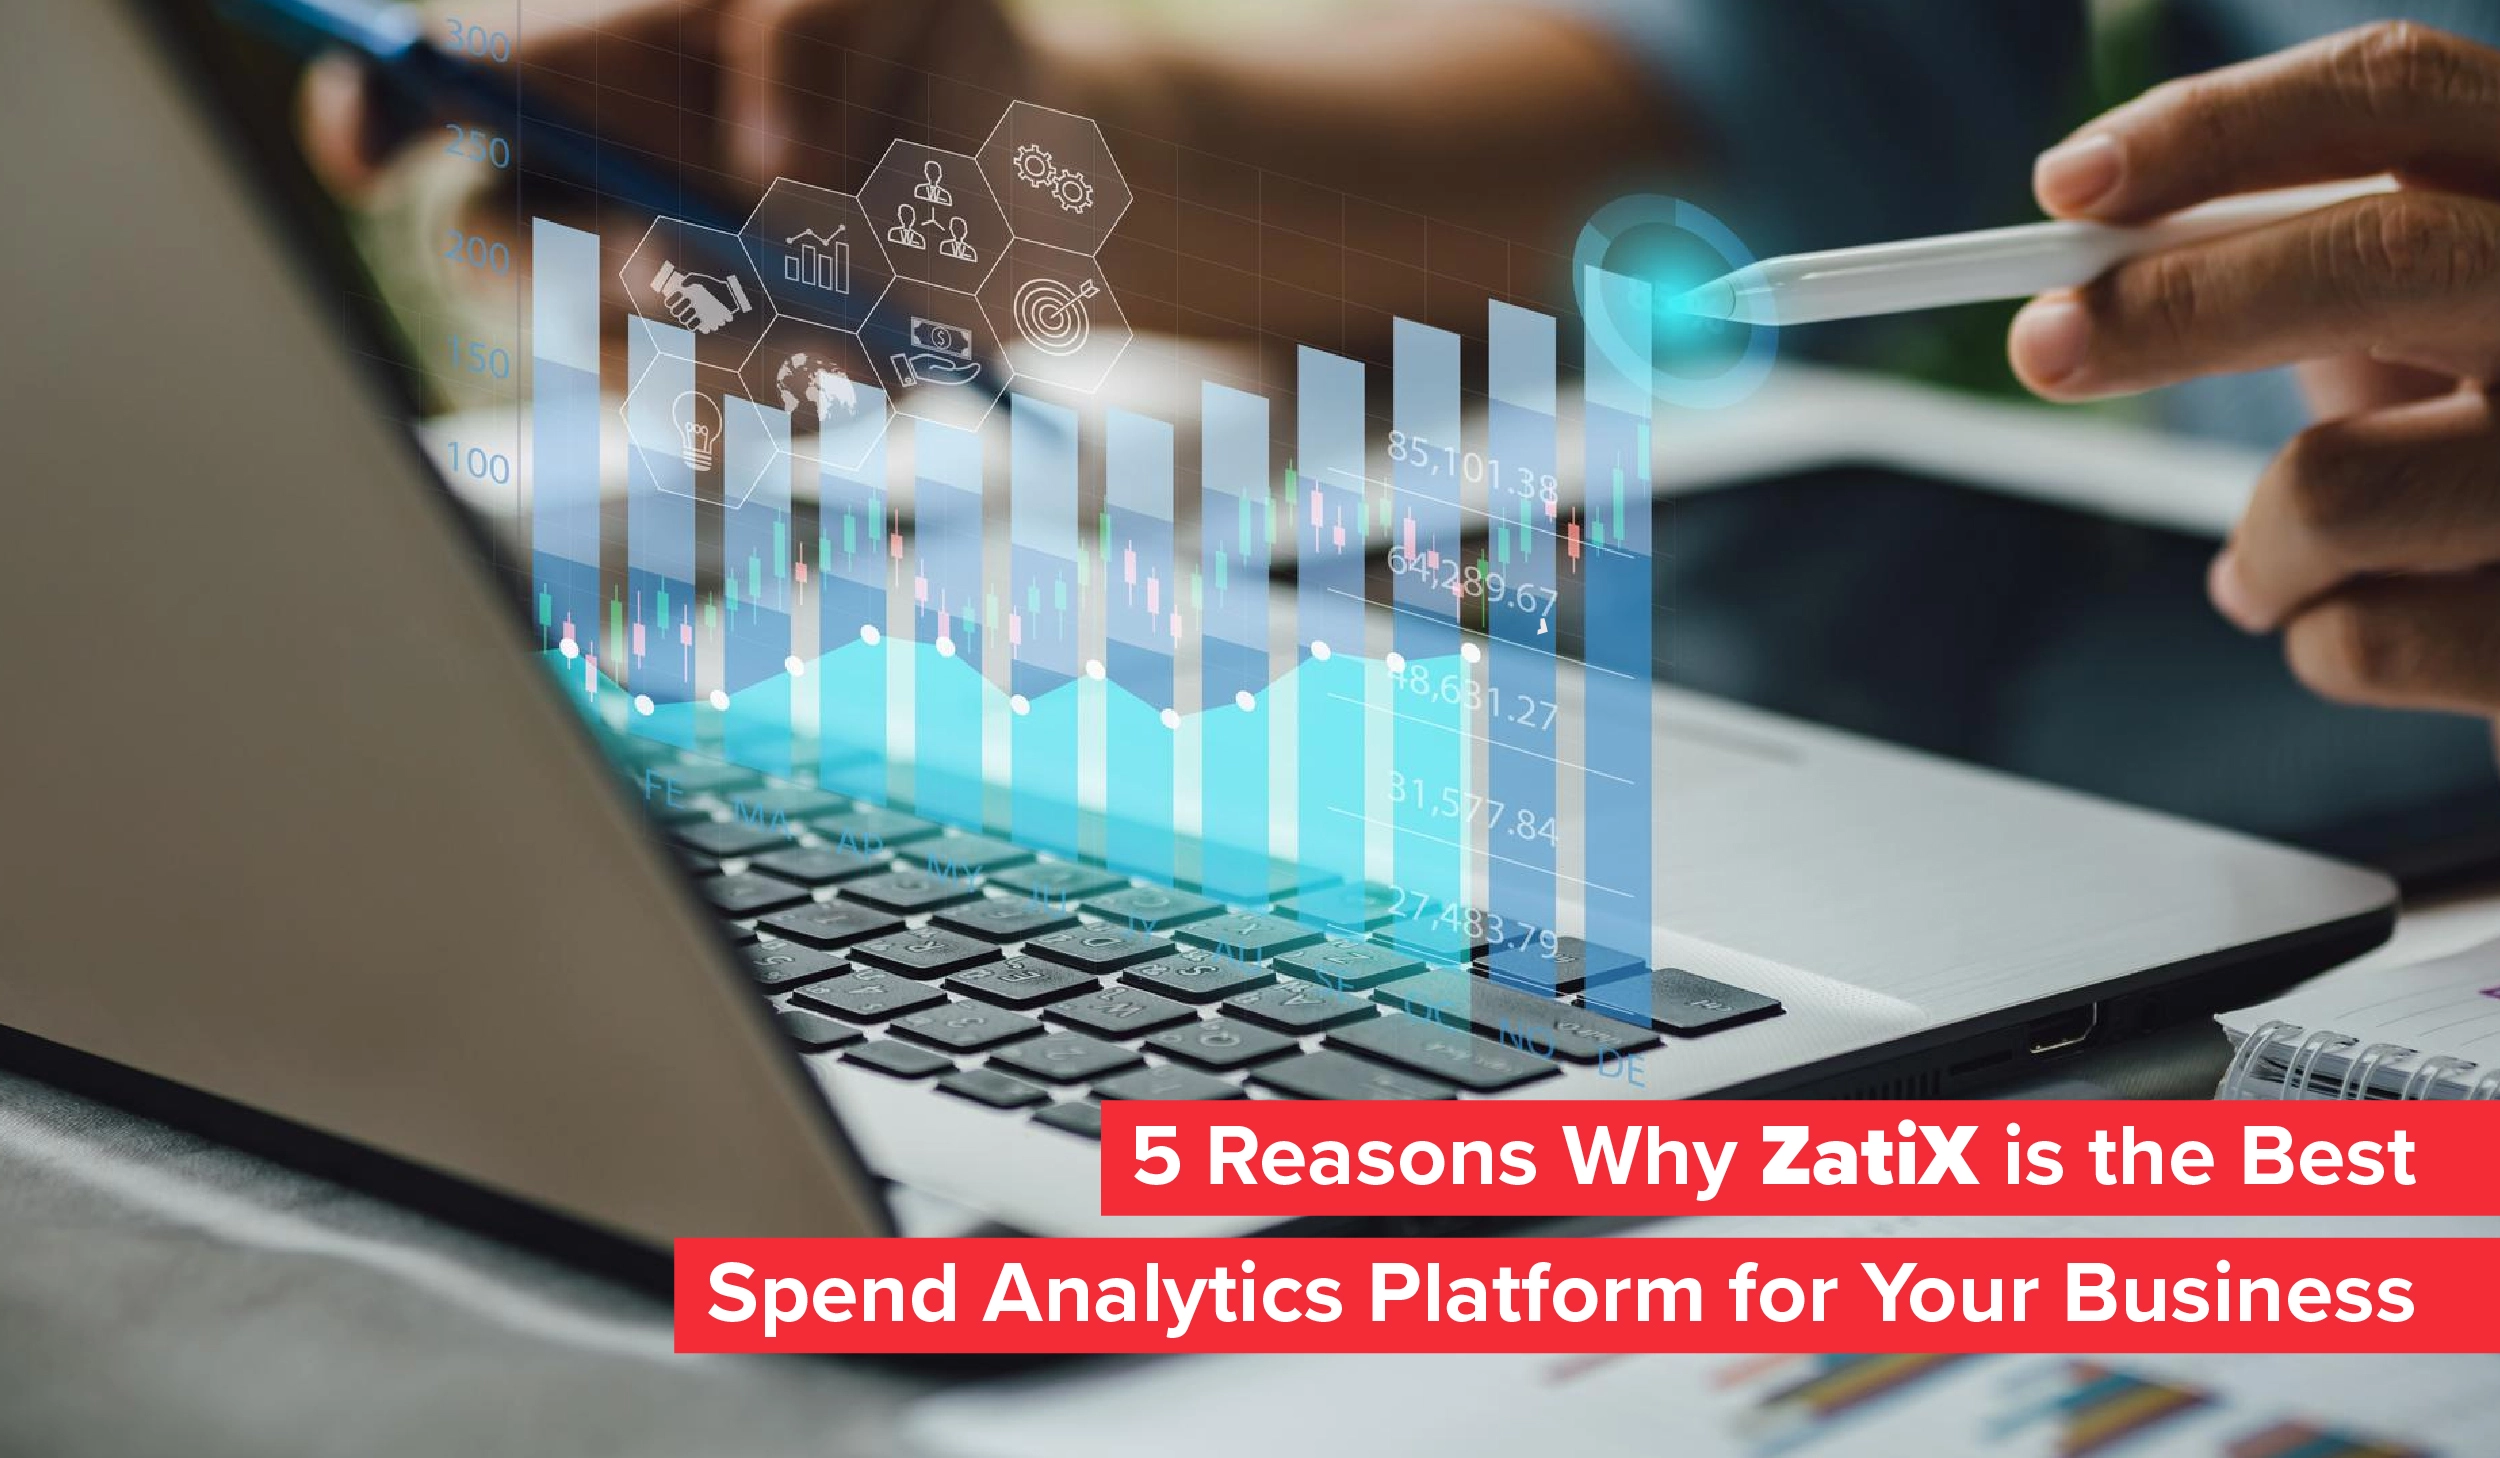 5 Reasons Why ZatiX is the Best Spend Analytics Platform for Your Business